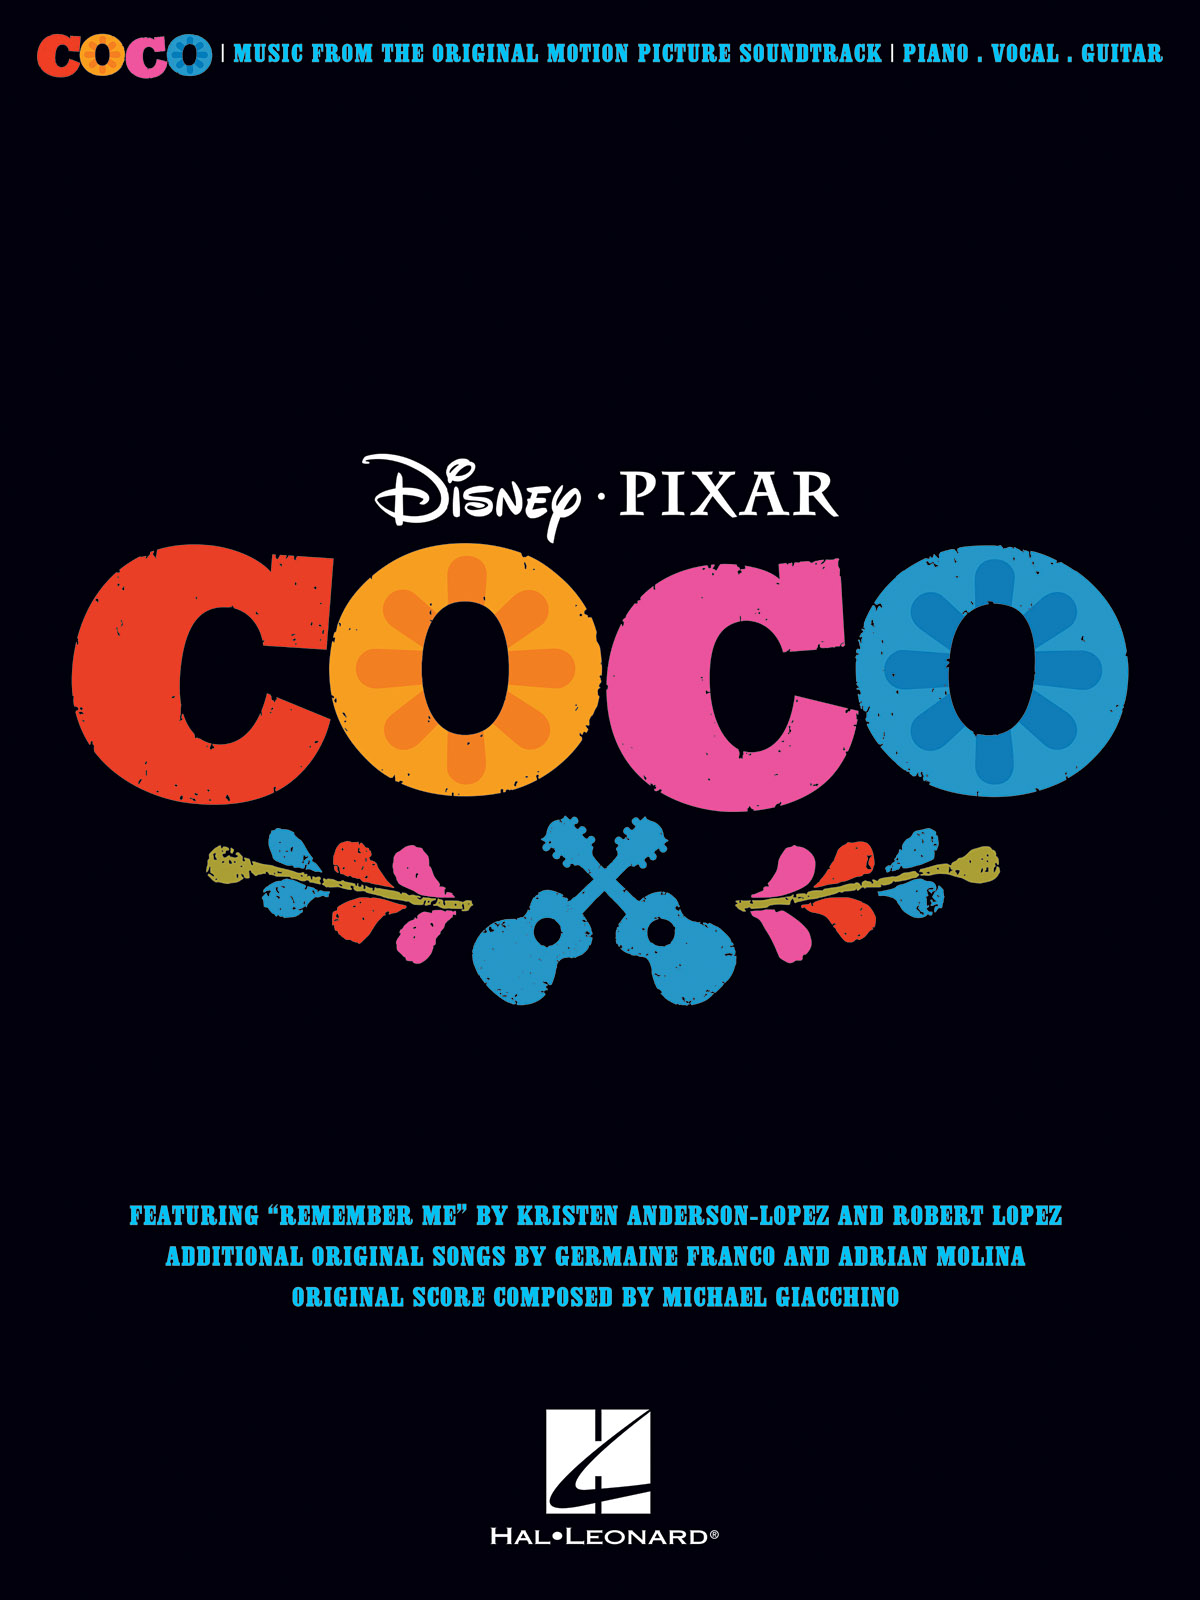 Disney/Pixar's Coco - Music from the Original Motion Picture Soundtrack